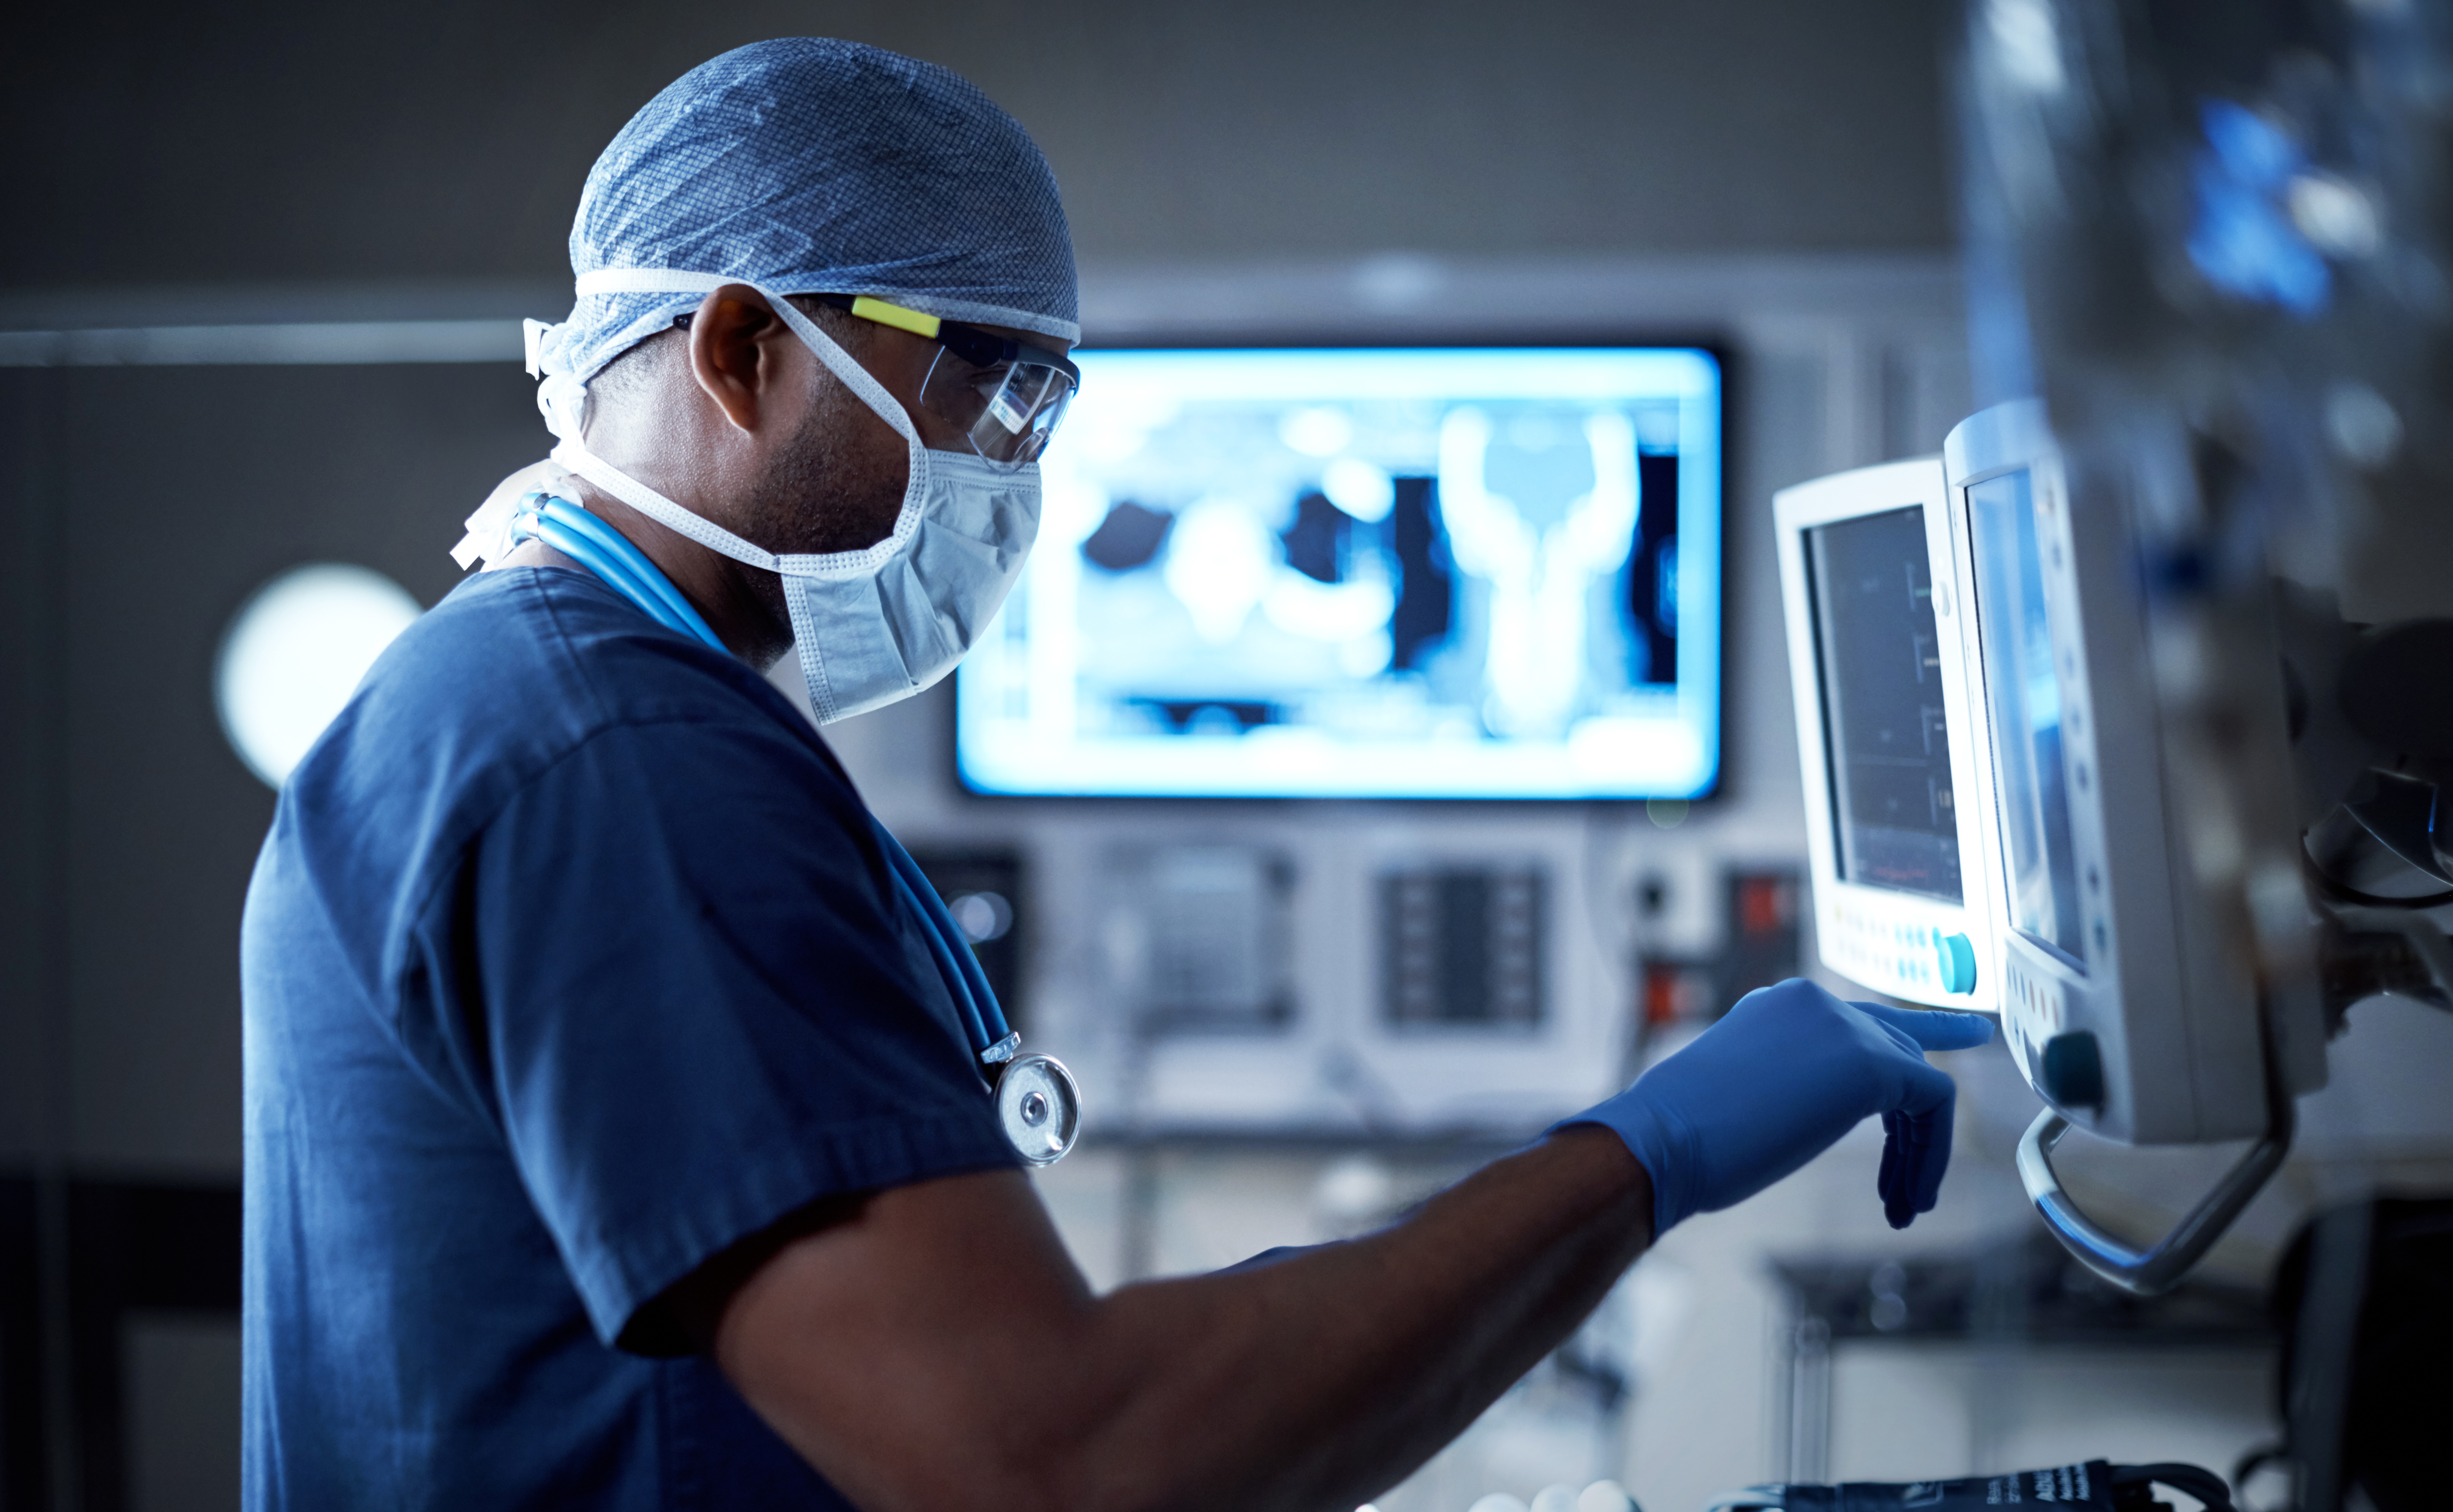 High-quality medical device software development is vital to ensure providers have access to best-in-class technology solutions.